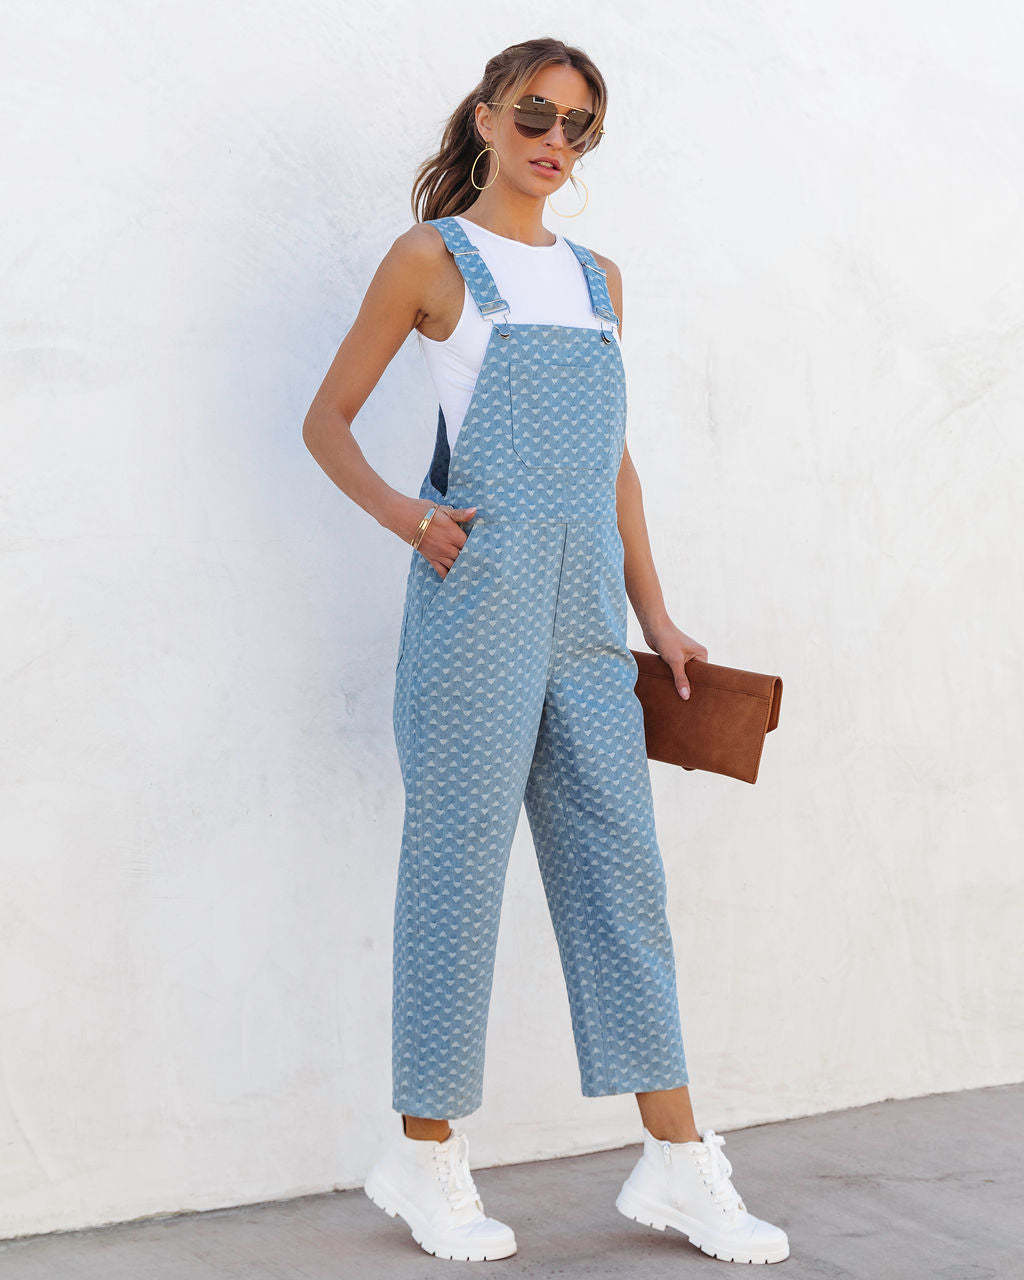 Denim Overalls with Jacquard Pattern | CozyCouture® - Stringspeed